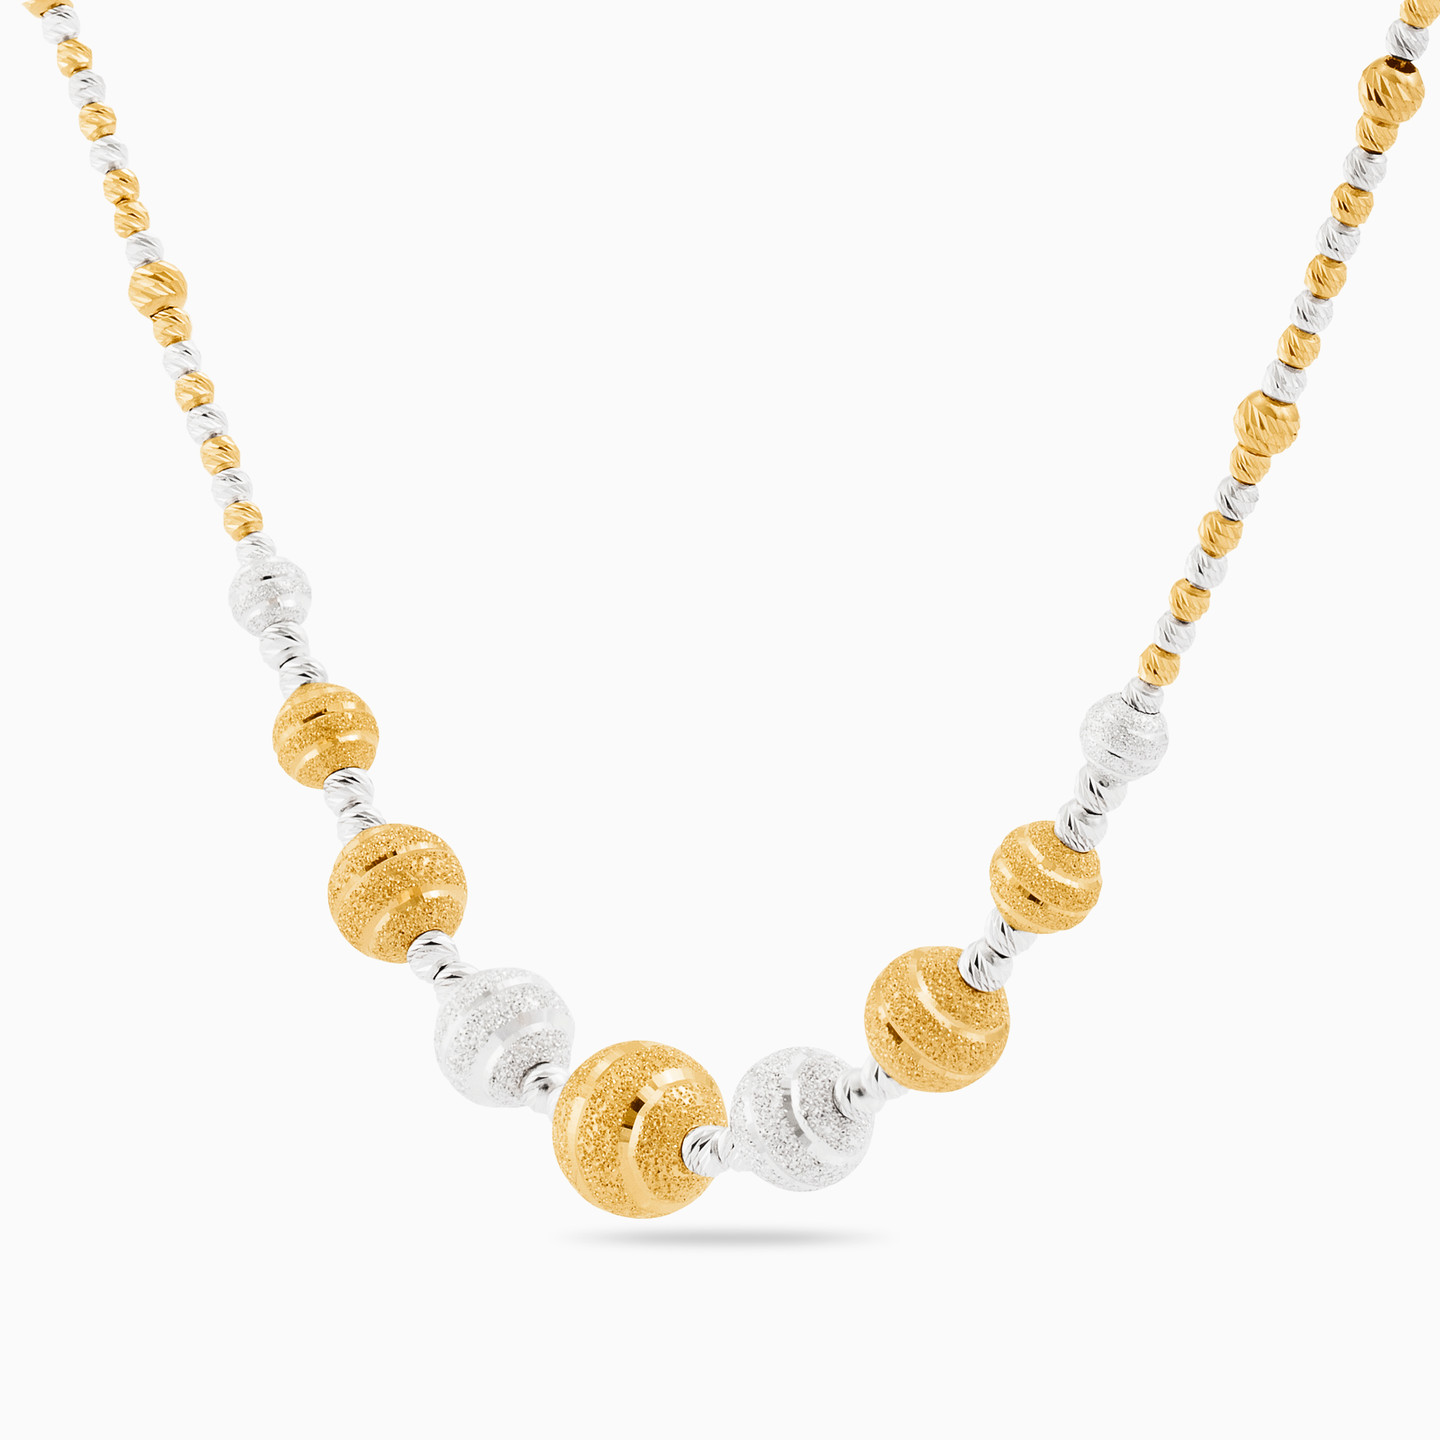 21K Gold Chain Necklace - 2